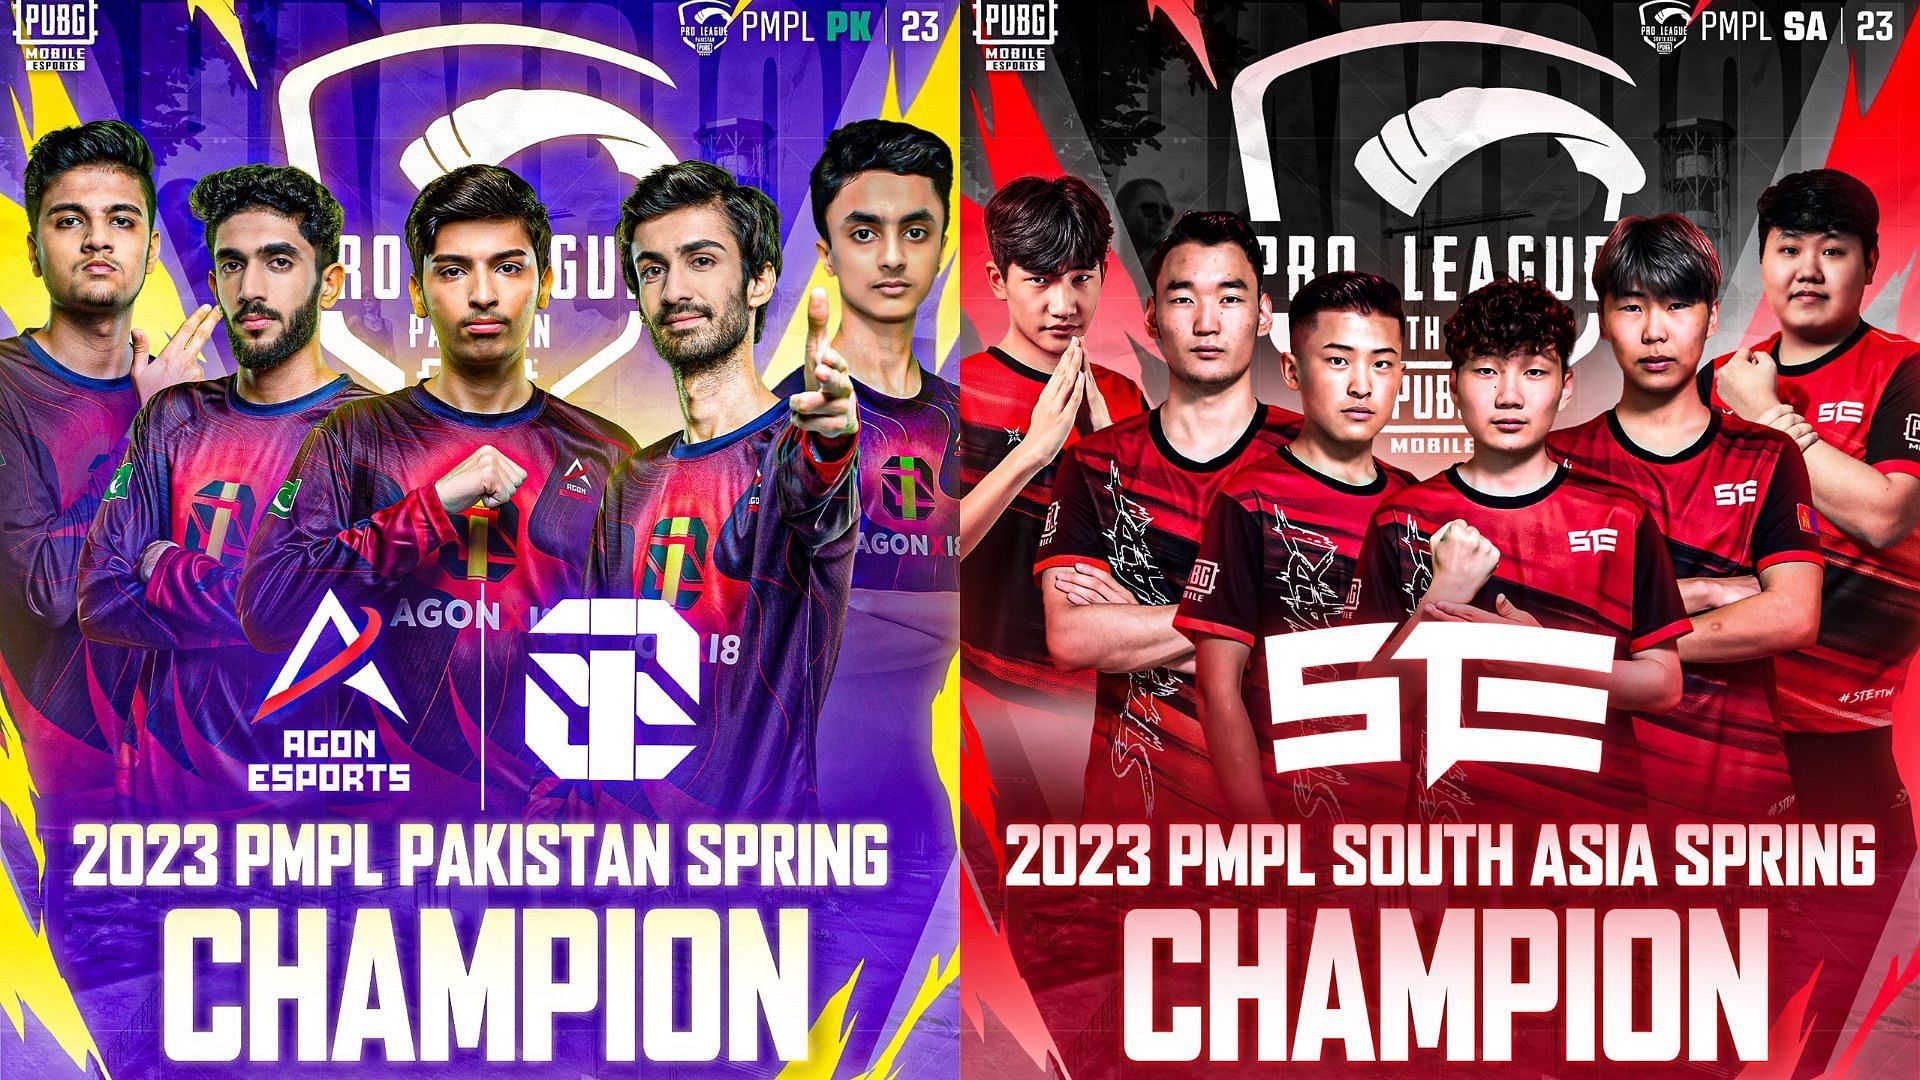 PMPL South Asia Championship 2023 Spring Teams, schedule, and more